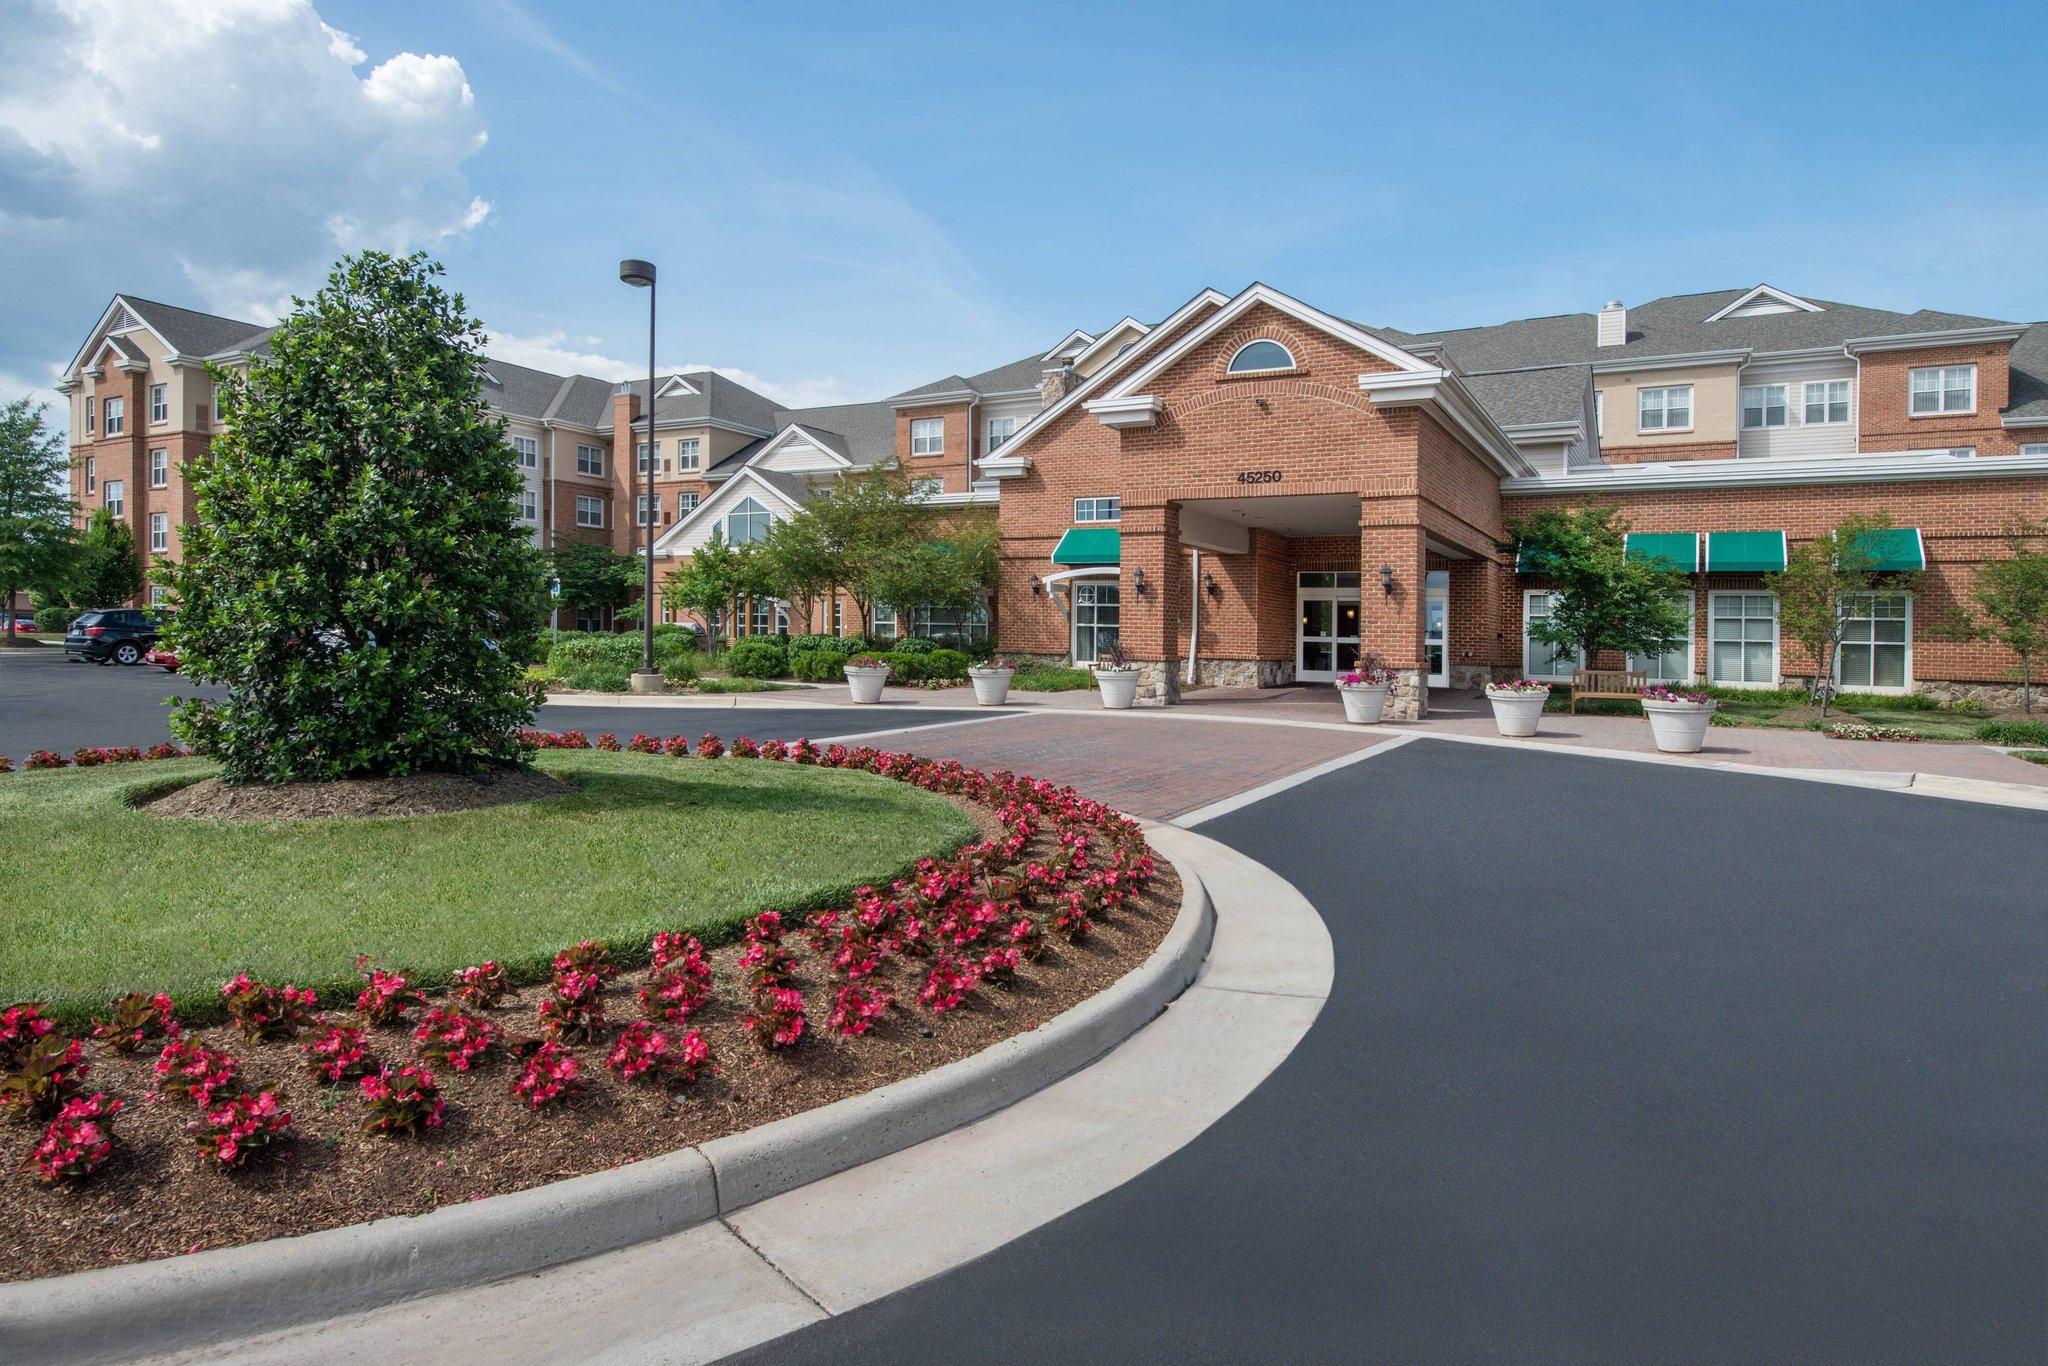 Residence Inn Dulles Airport at Dulles 28 Centre in Dulles, VA